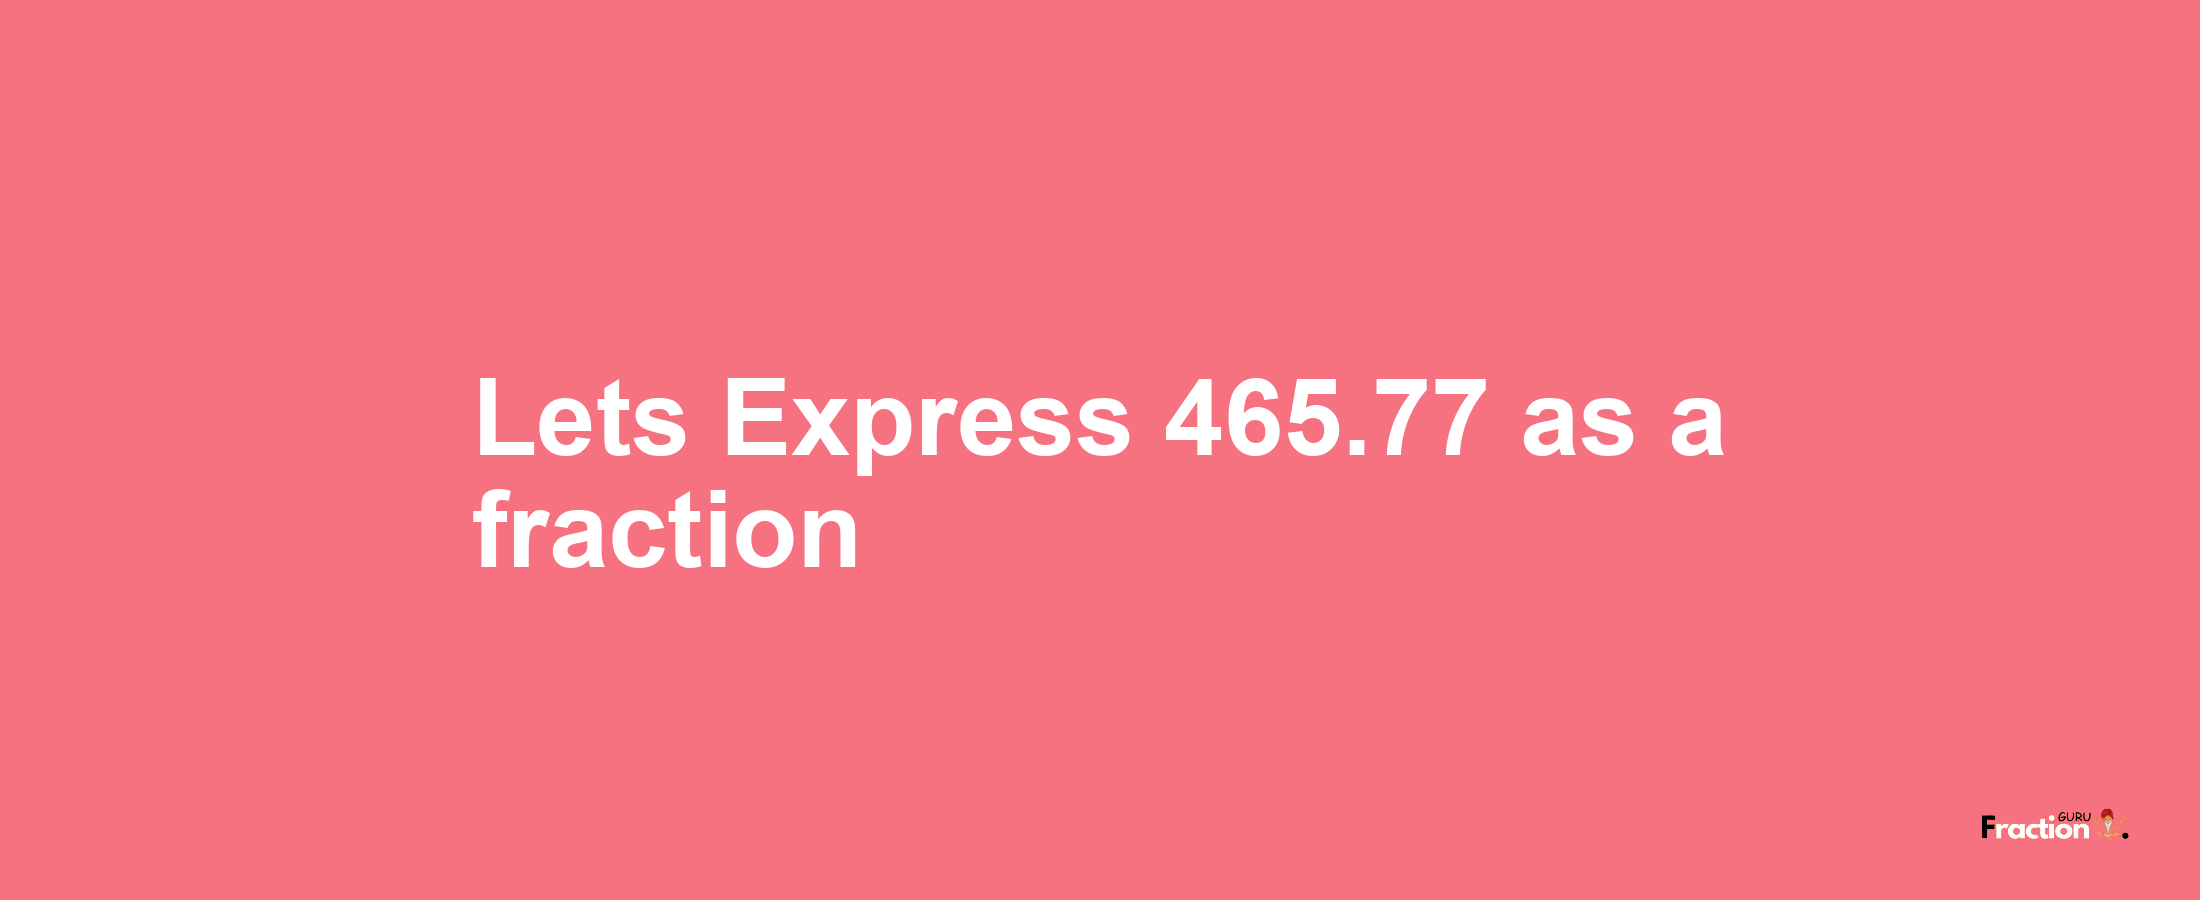 Lets Express 465.77 as afraction